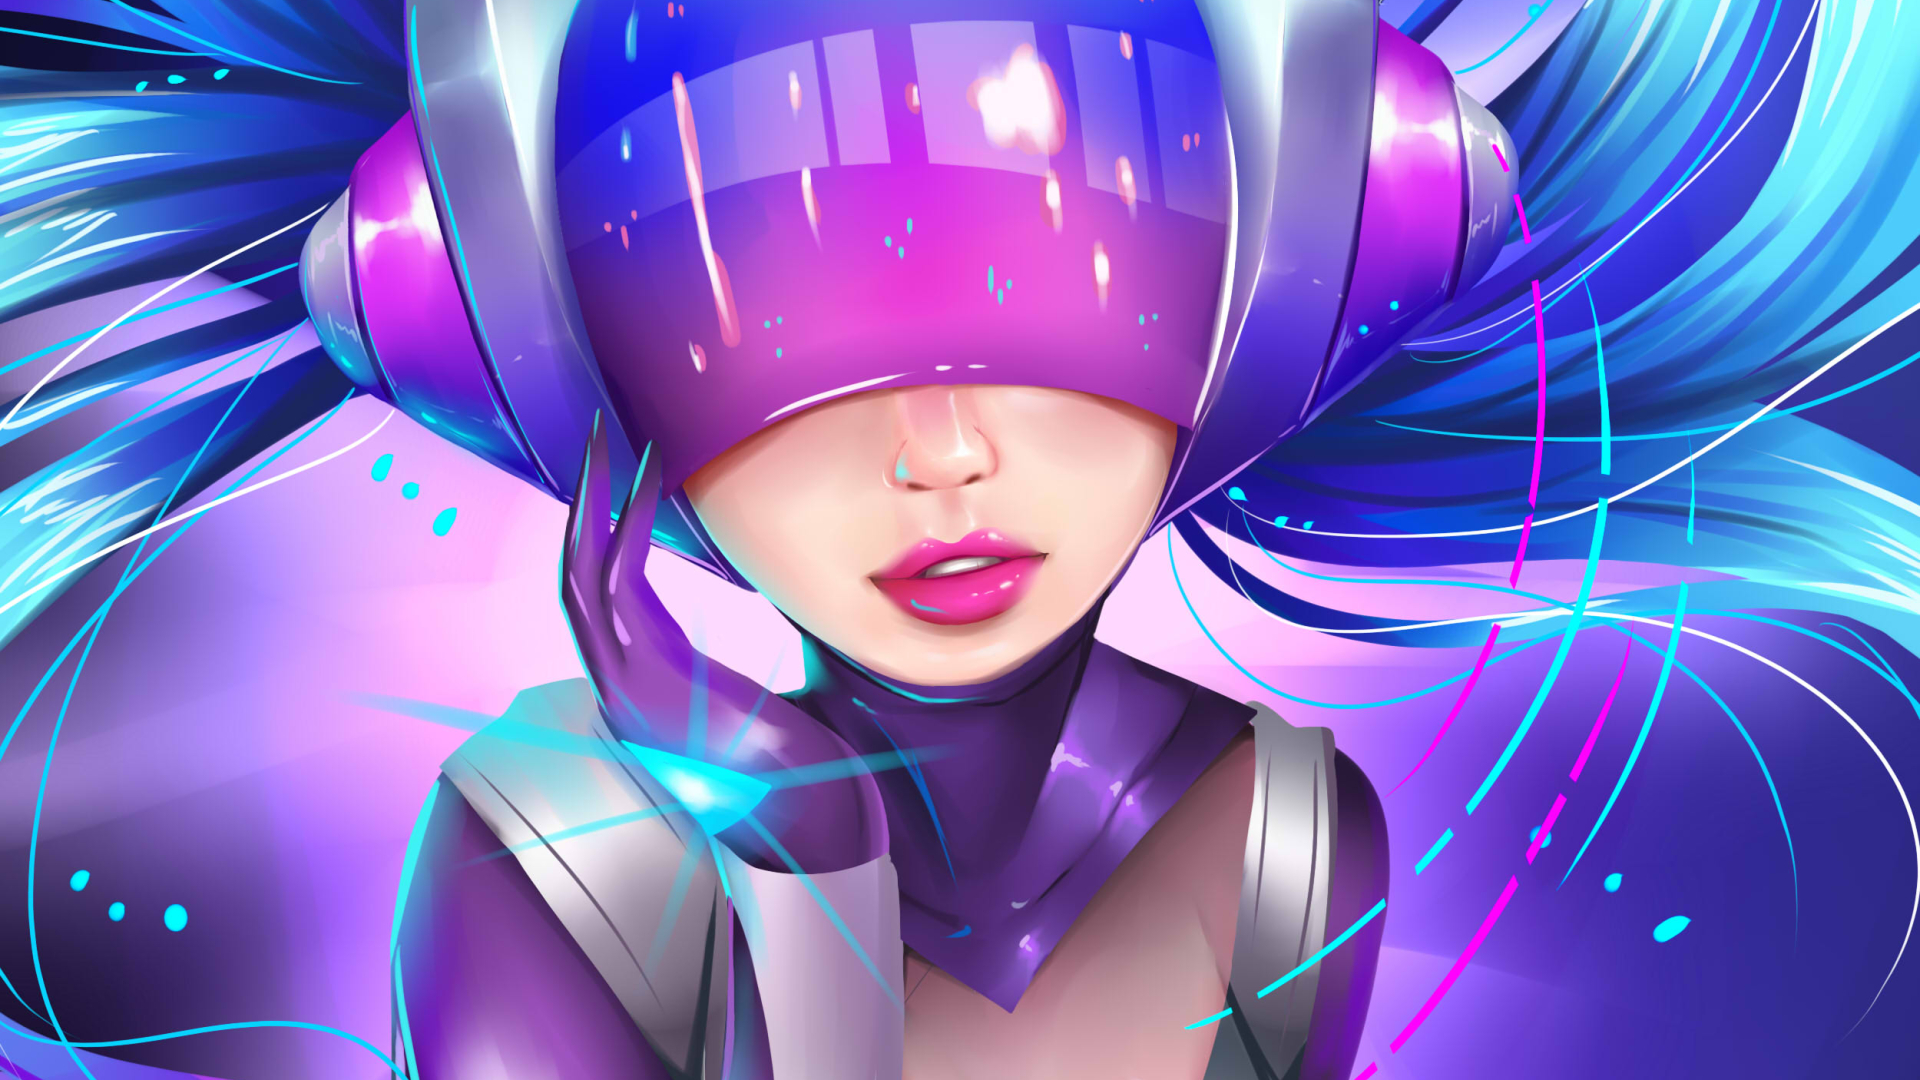 1920x1080 10+ DJ Sona HD Wallpapers and Backgrounds